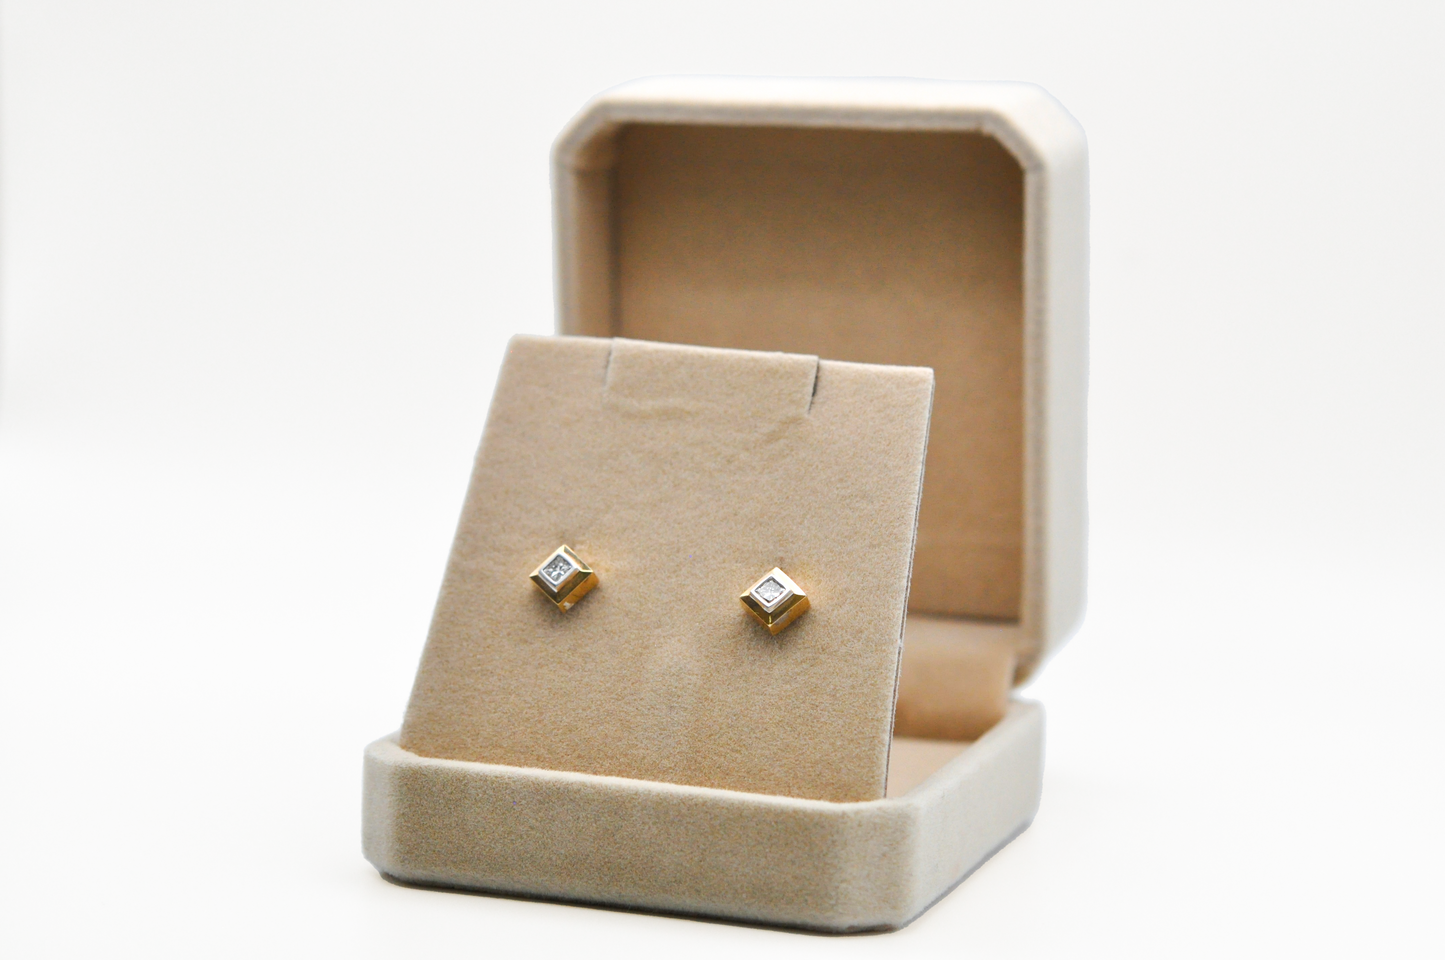 Yellow Gold Square Shaped Stud Earrings with a Diamond Center Stone